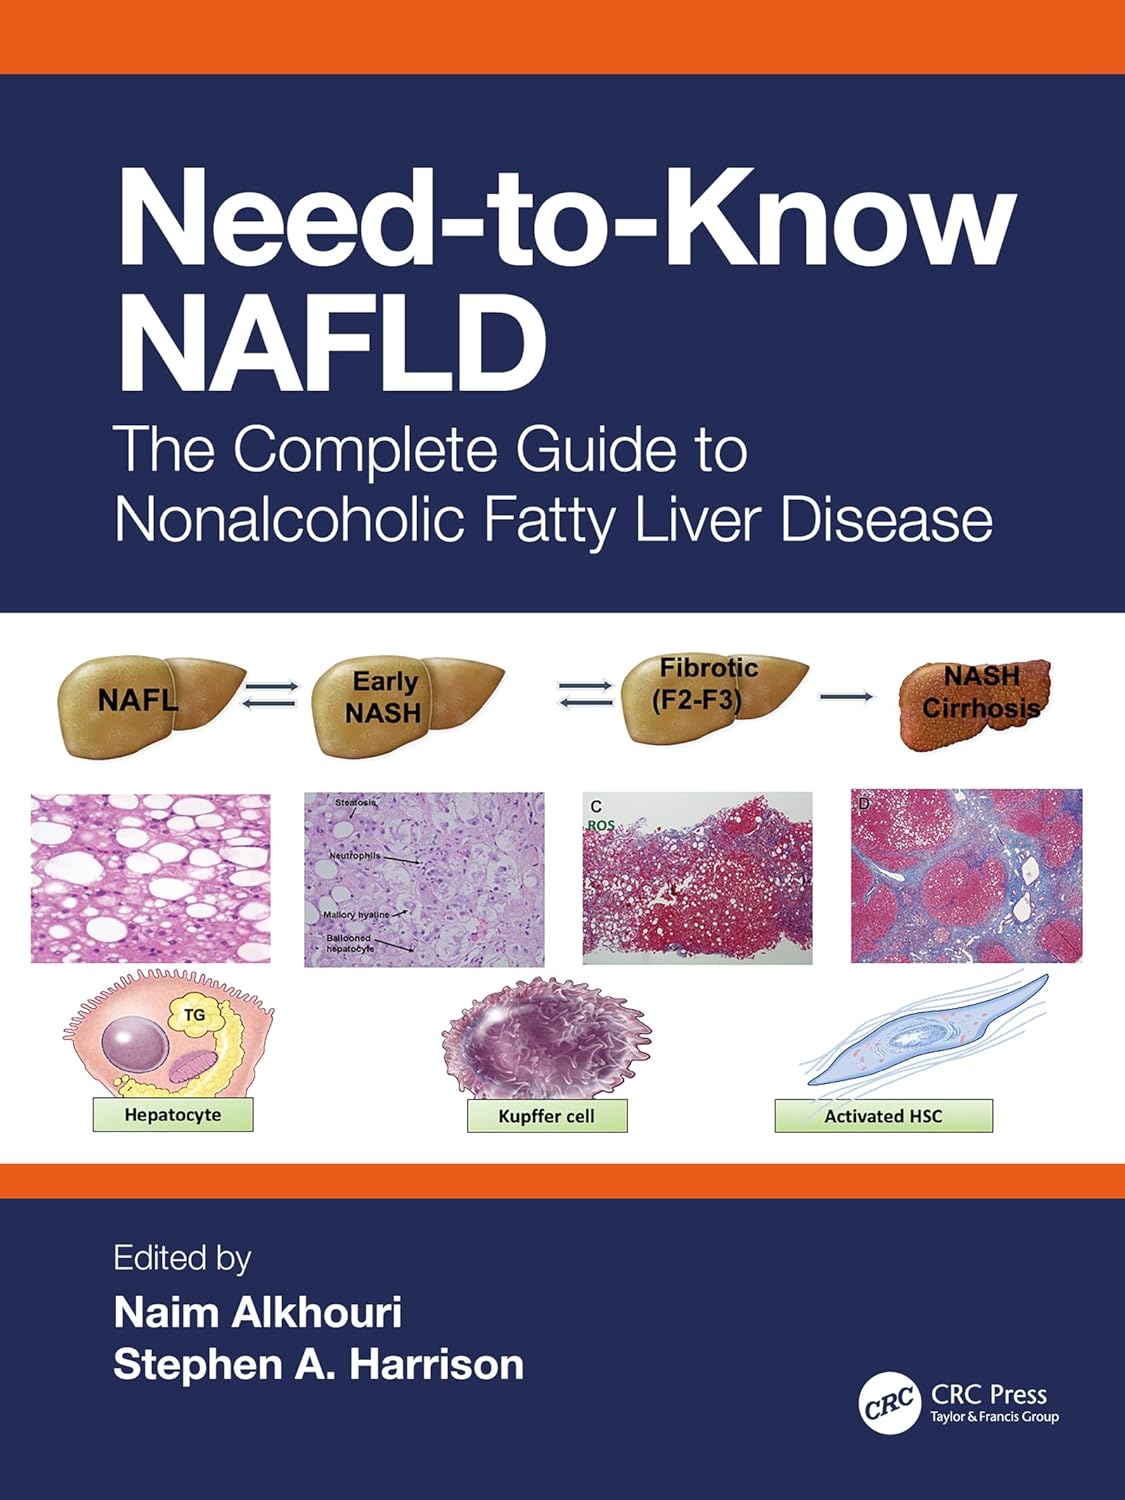 Need-to-Know NAFLD: The Complete Guide to Nonalcoholic Fatty Liver Disease  by Naim Alkhouri 